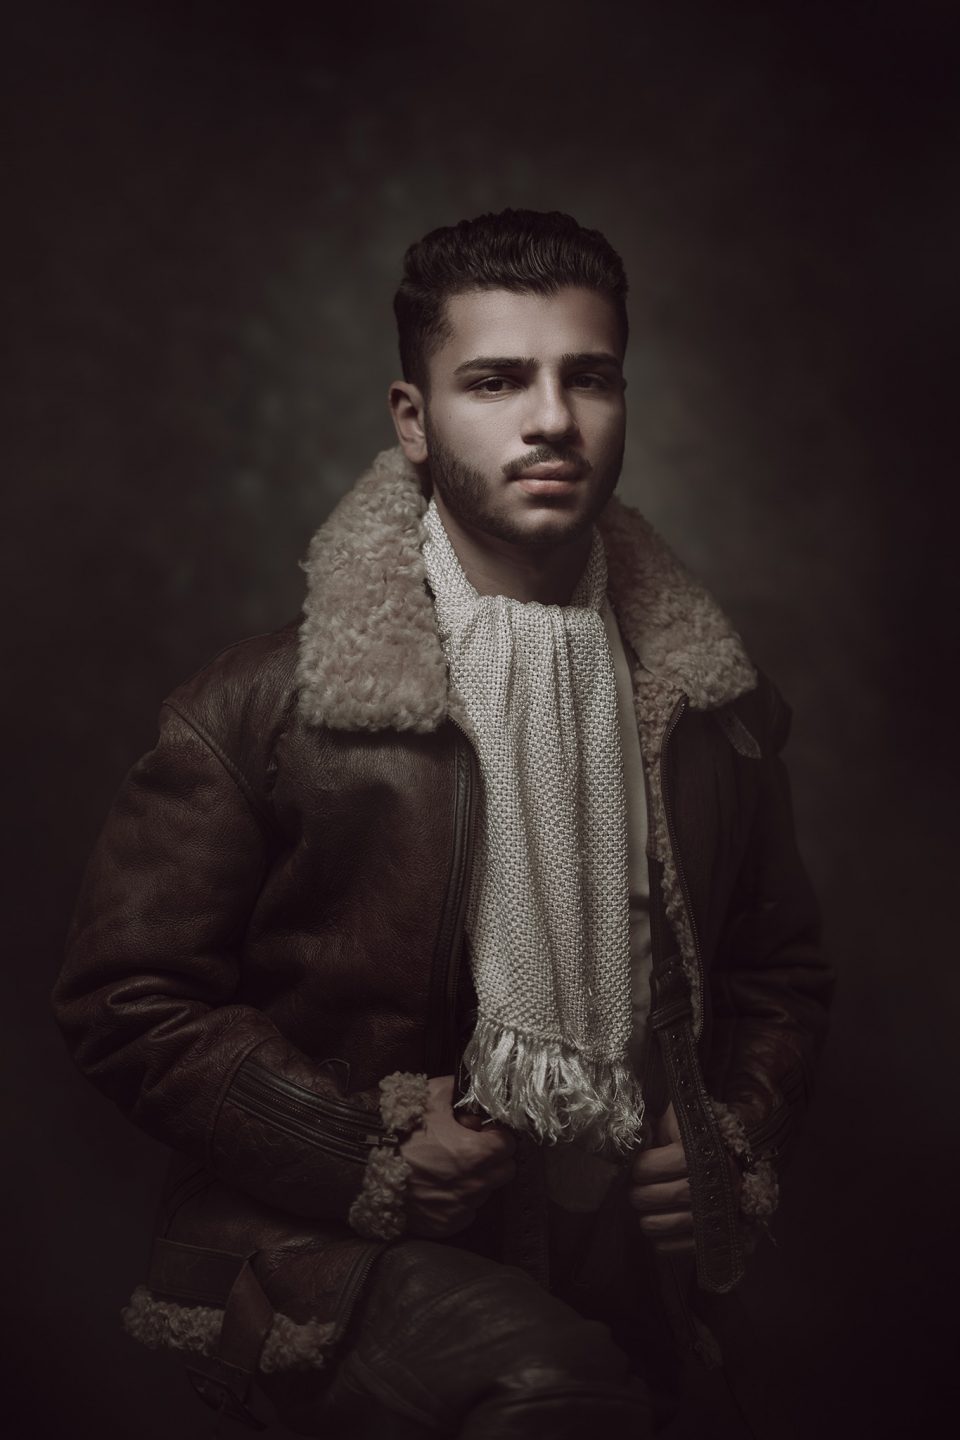 Photograph ‘The Aviator’ taken by Melbourne photographer. Subject is wearing genuine WW2 Airforce attire, leather jacket and woven cream scarf